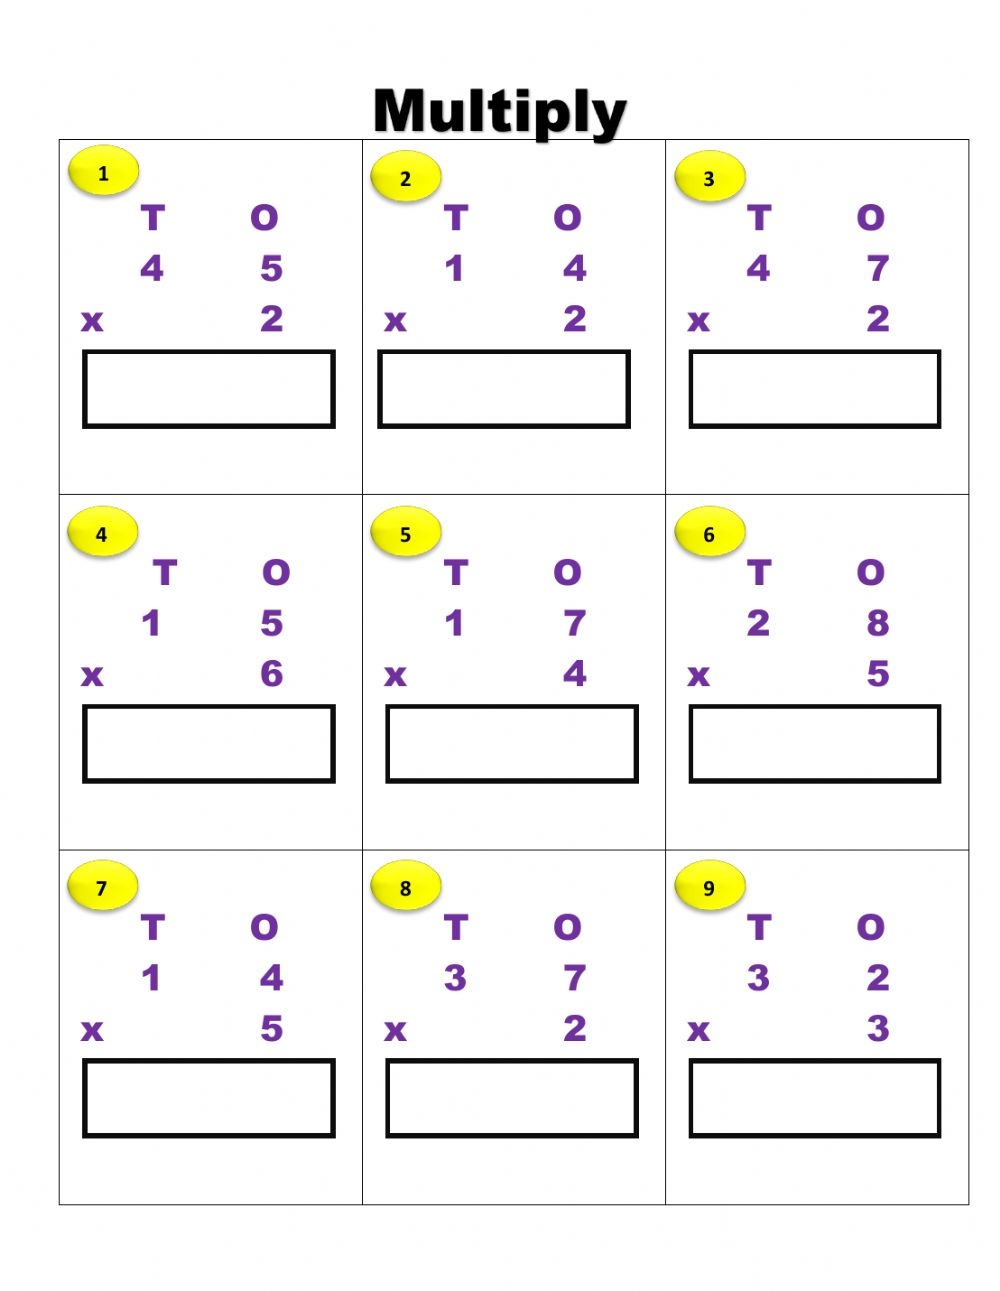 Simple Multiplication Problems